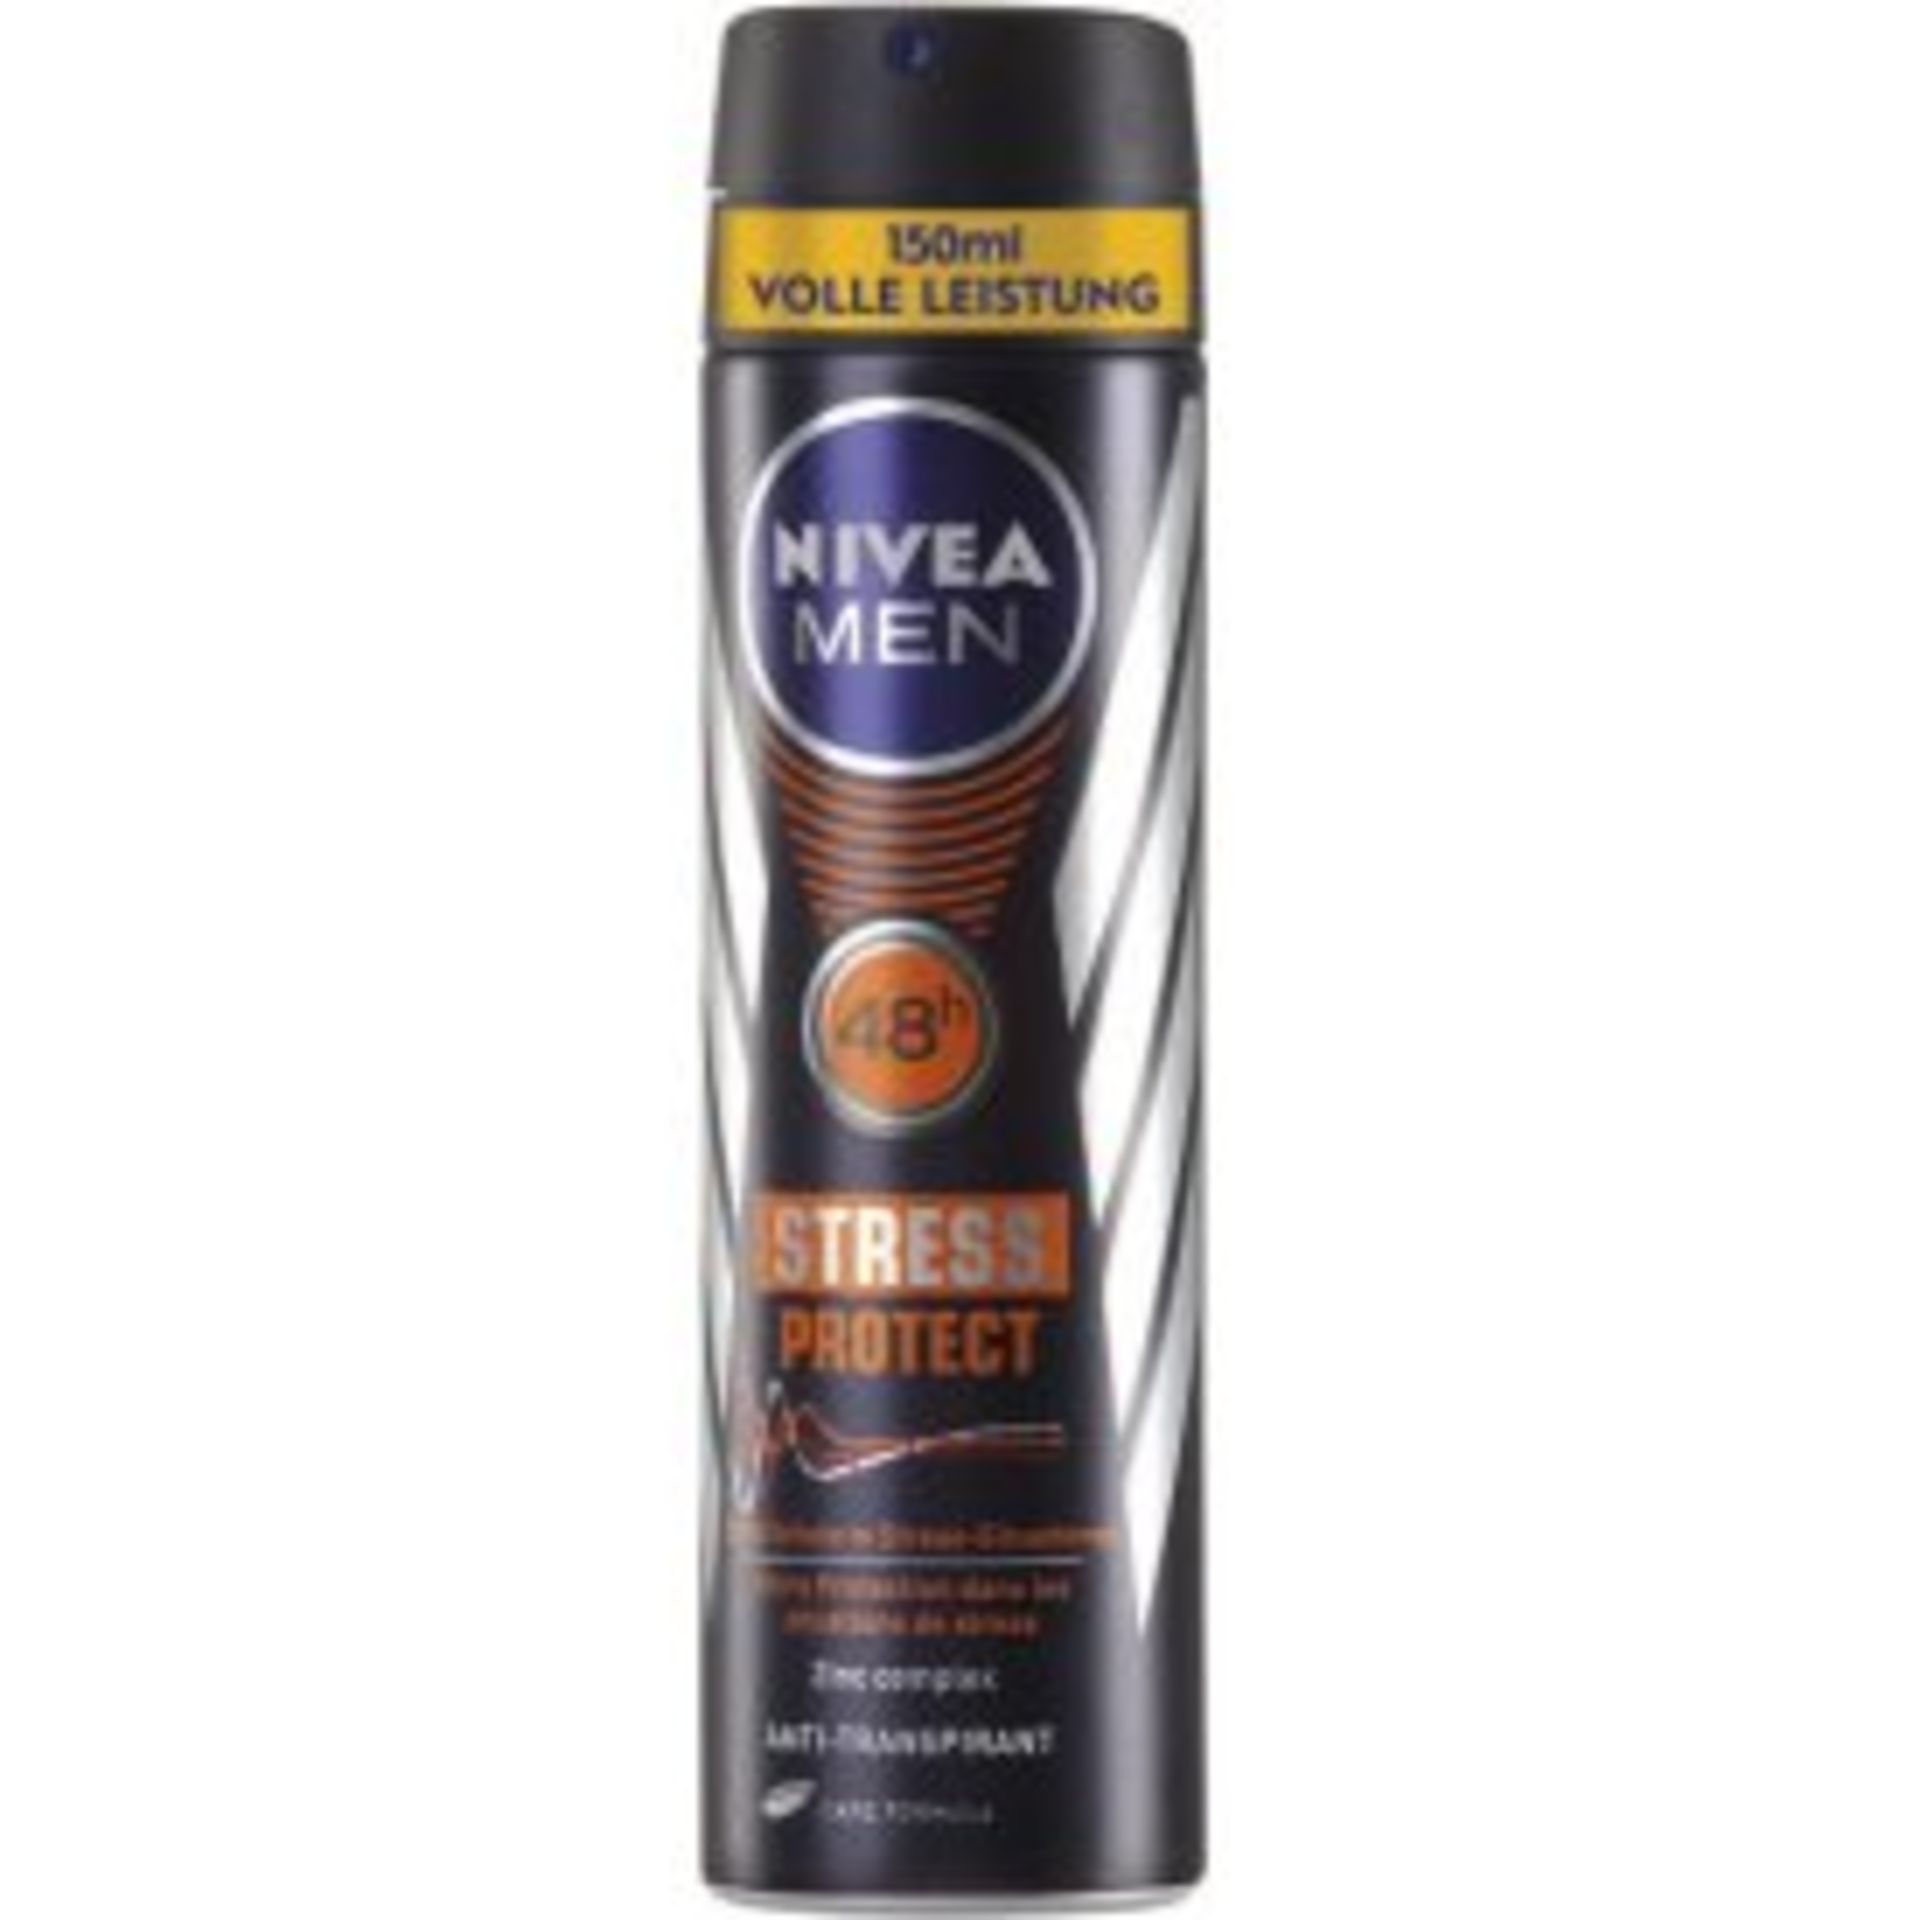 V Brand New Six Cans Of Nivea Men 48 Hour Stress Protect Anti-Transpirant SRP Total £14.94